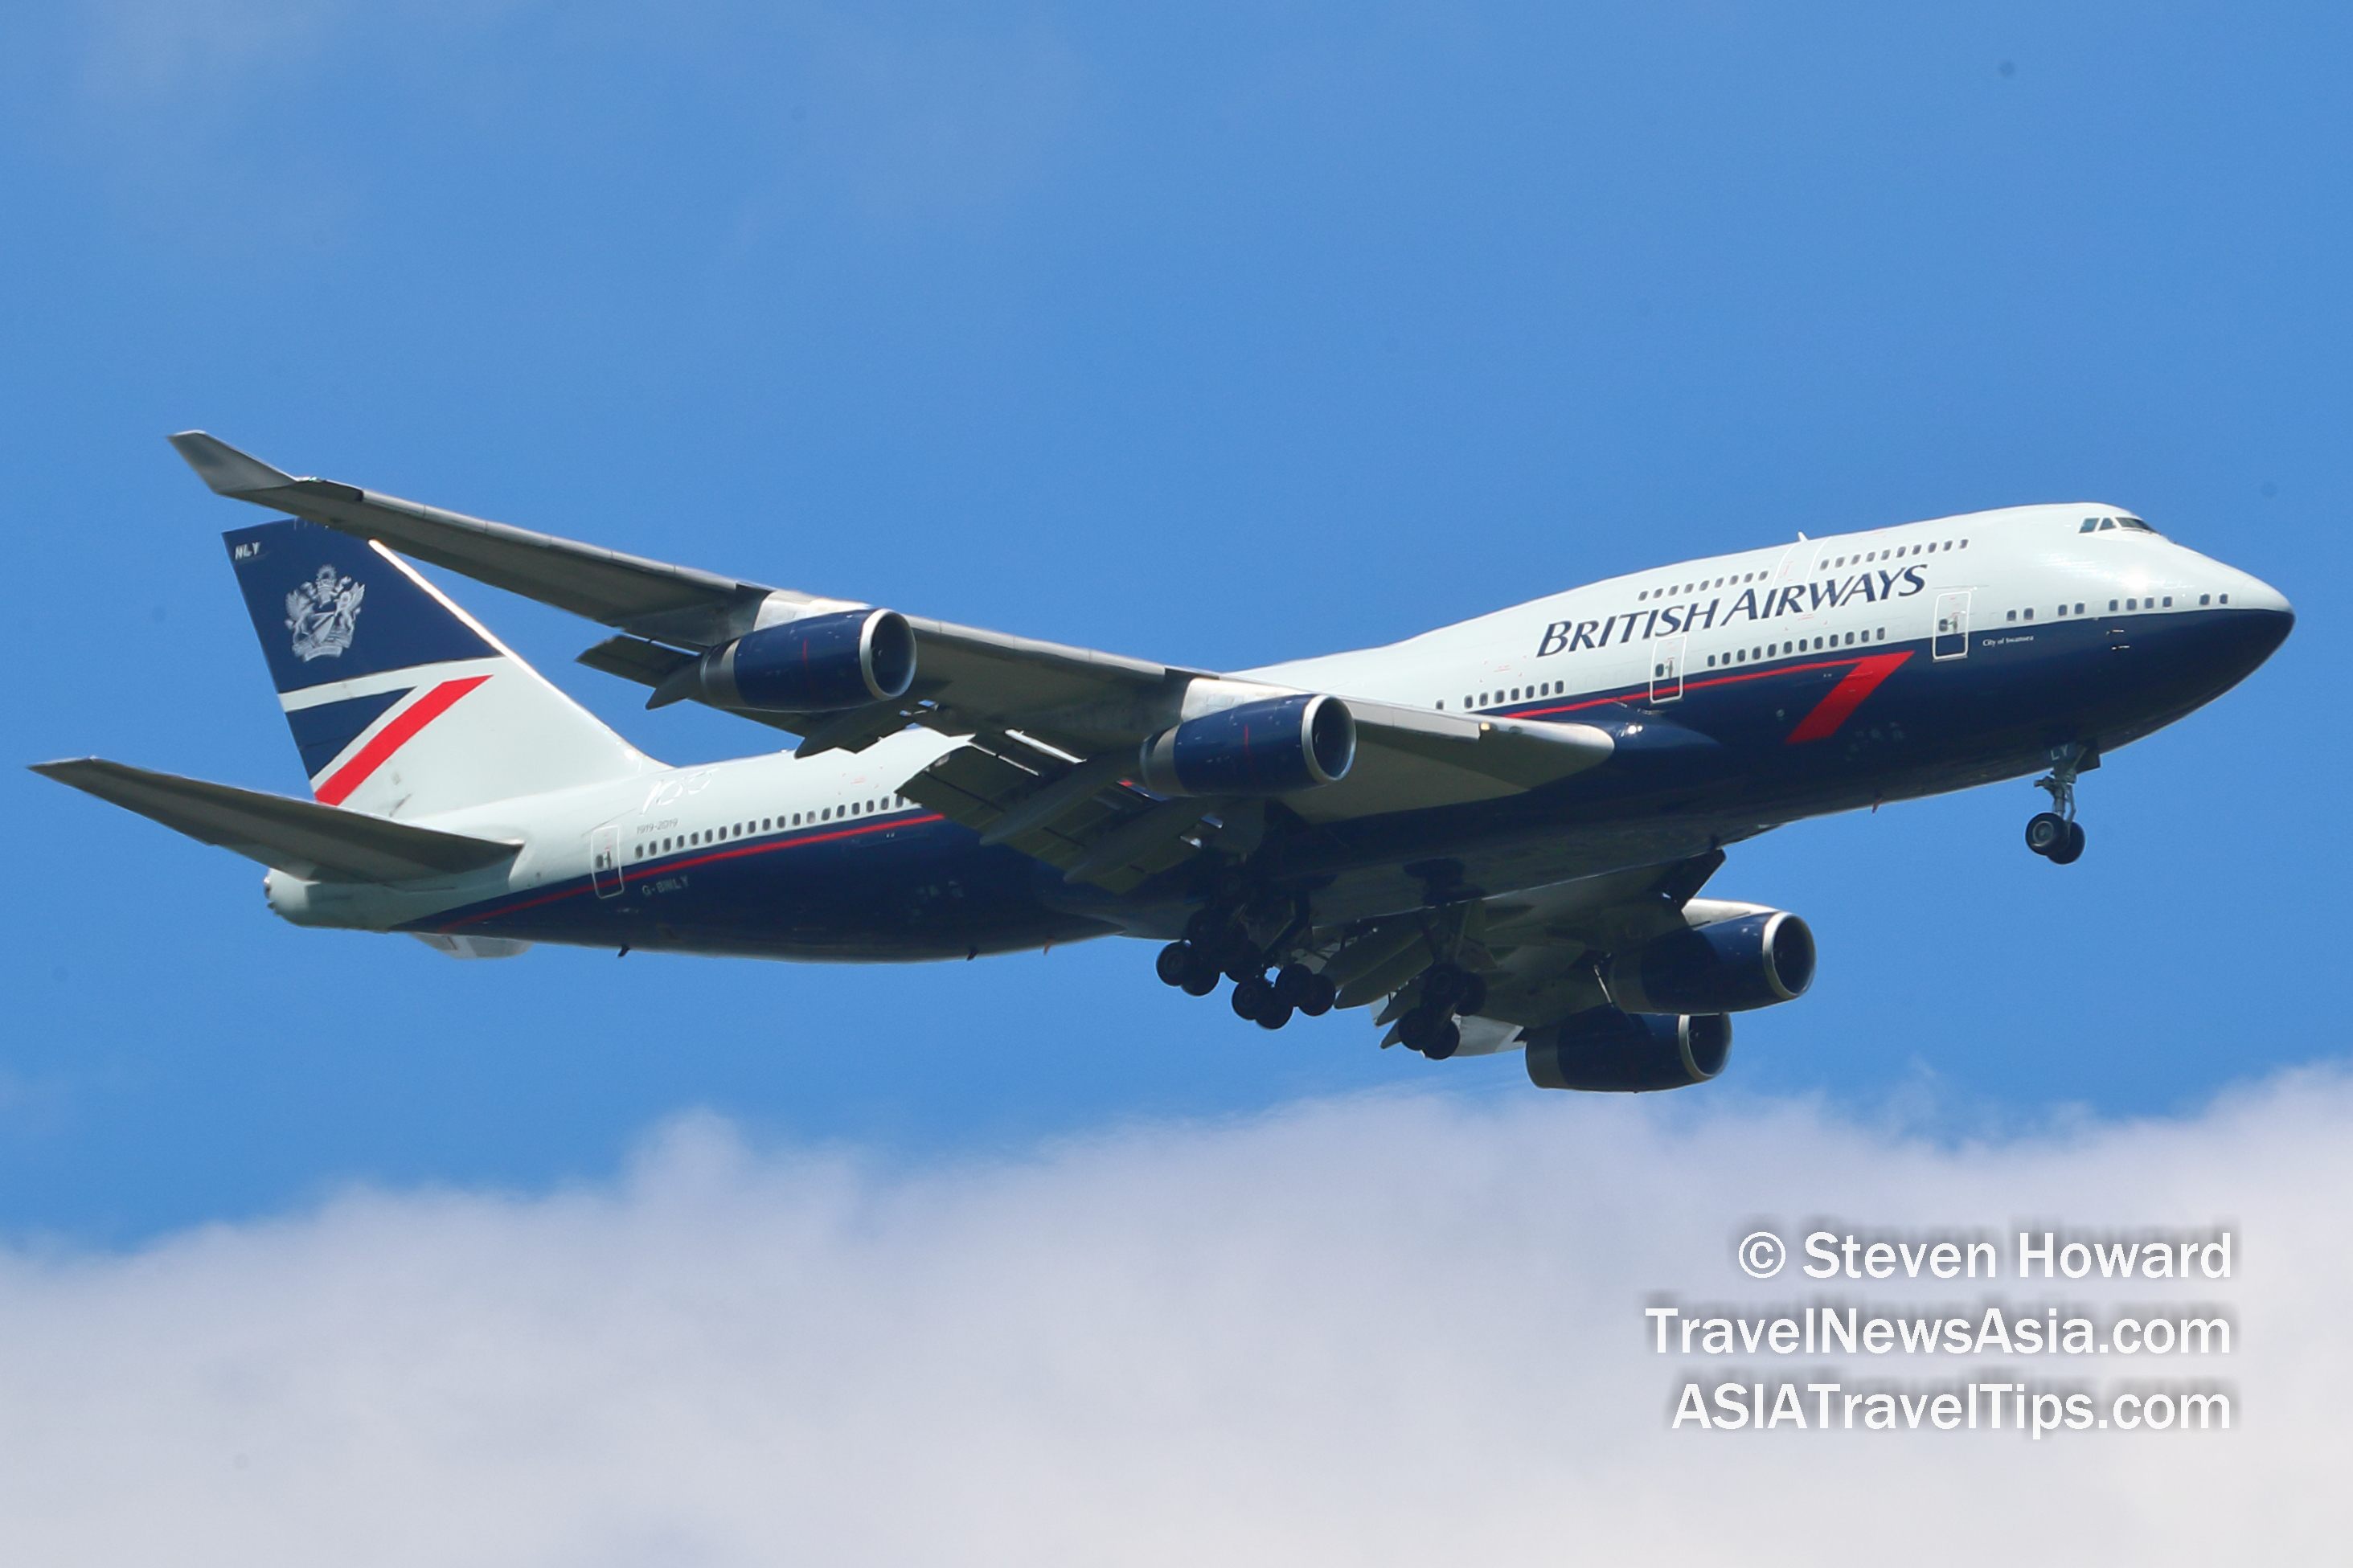 British Airways Boeing 747 reg: G-BNLY featuring the elegant Landor livery which BA used on its aircraft between 1984 and 1997. Picture by Steven Howard of TravelNewsAsia.com on 3 July 2019. Click to enlarge.